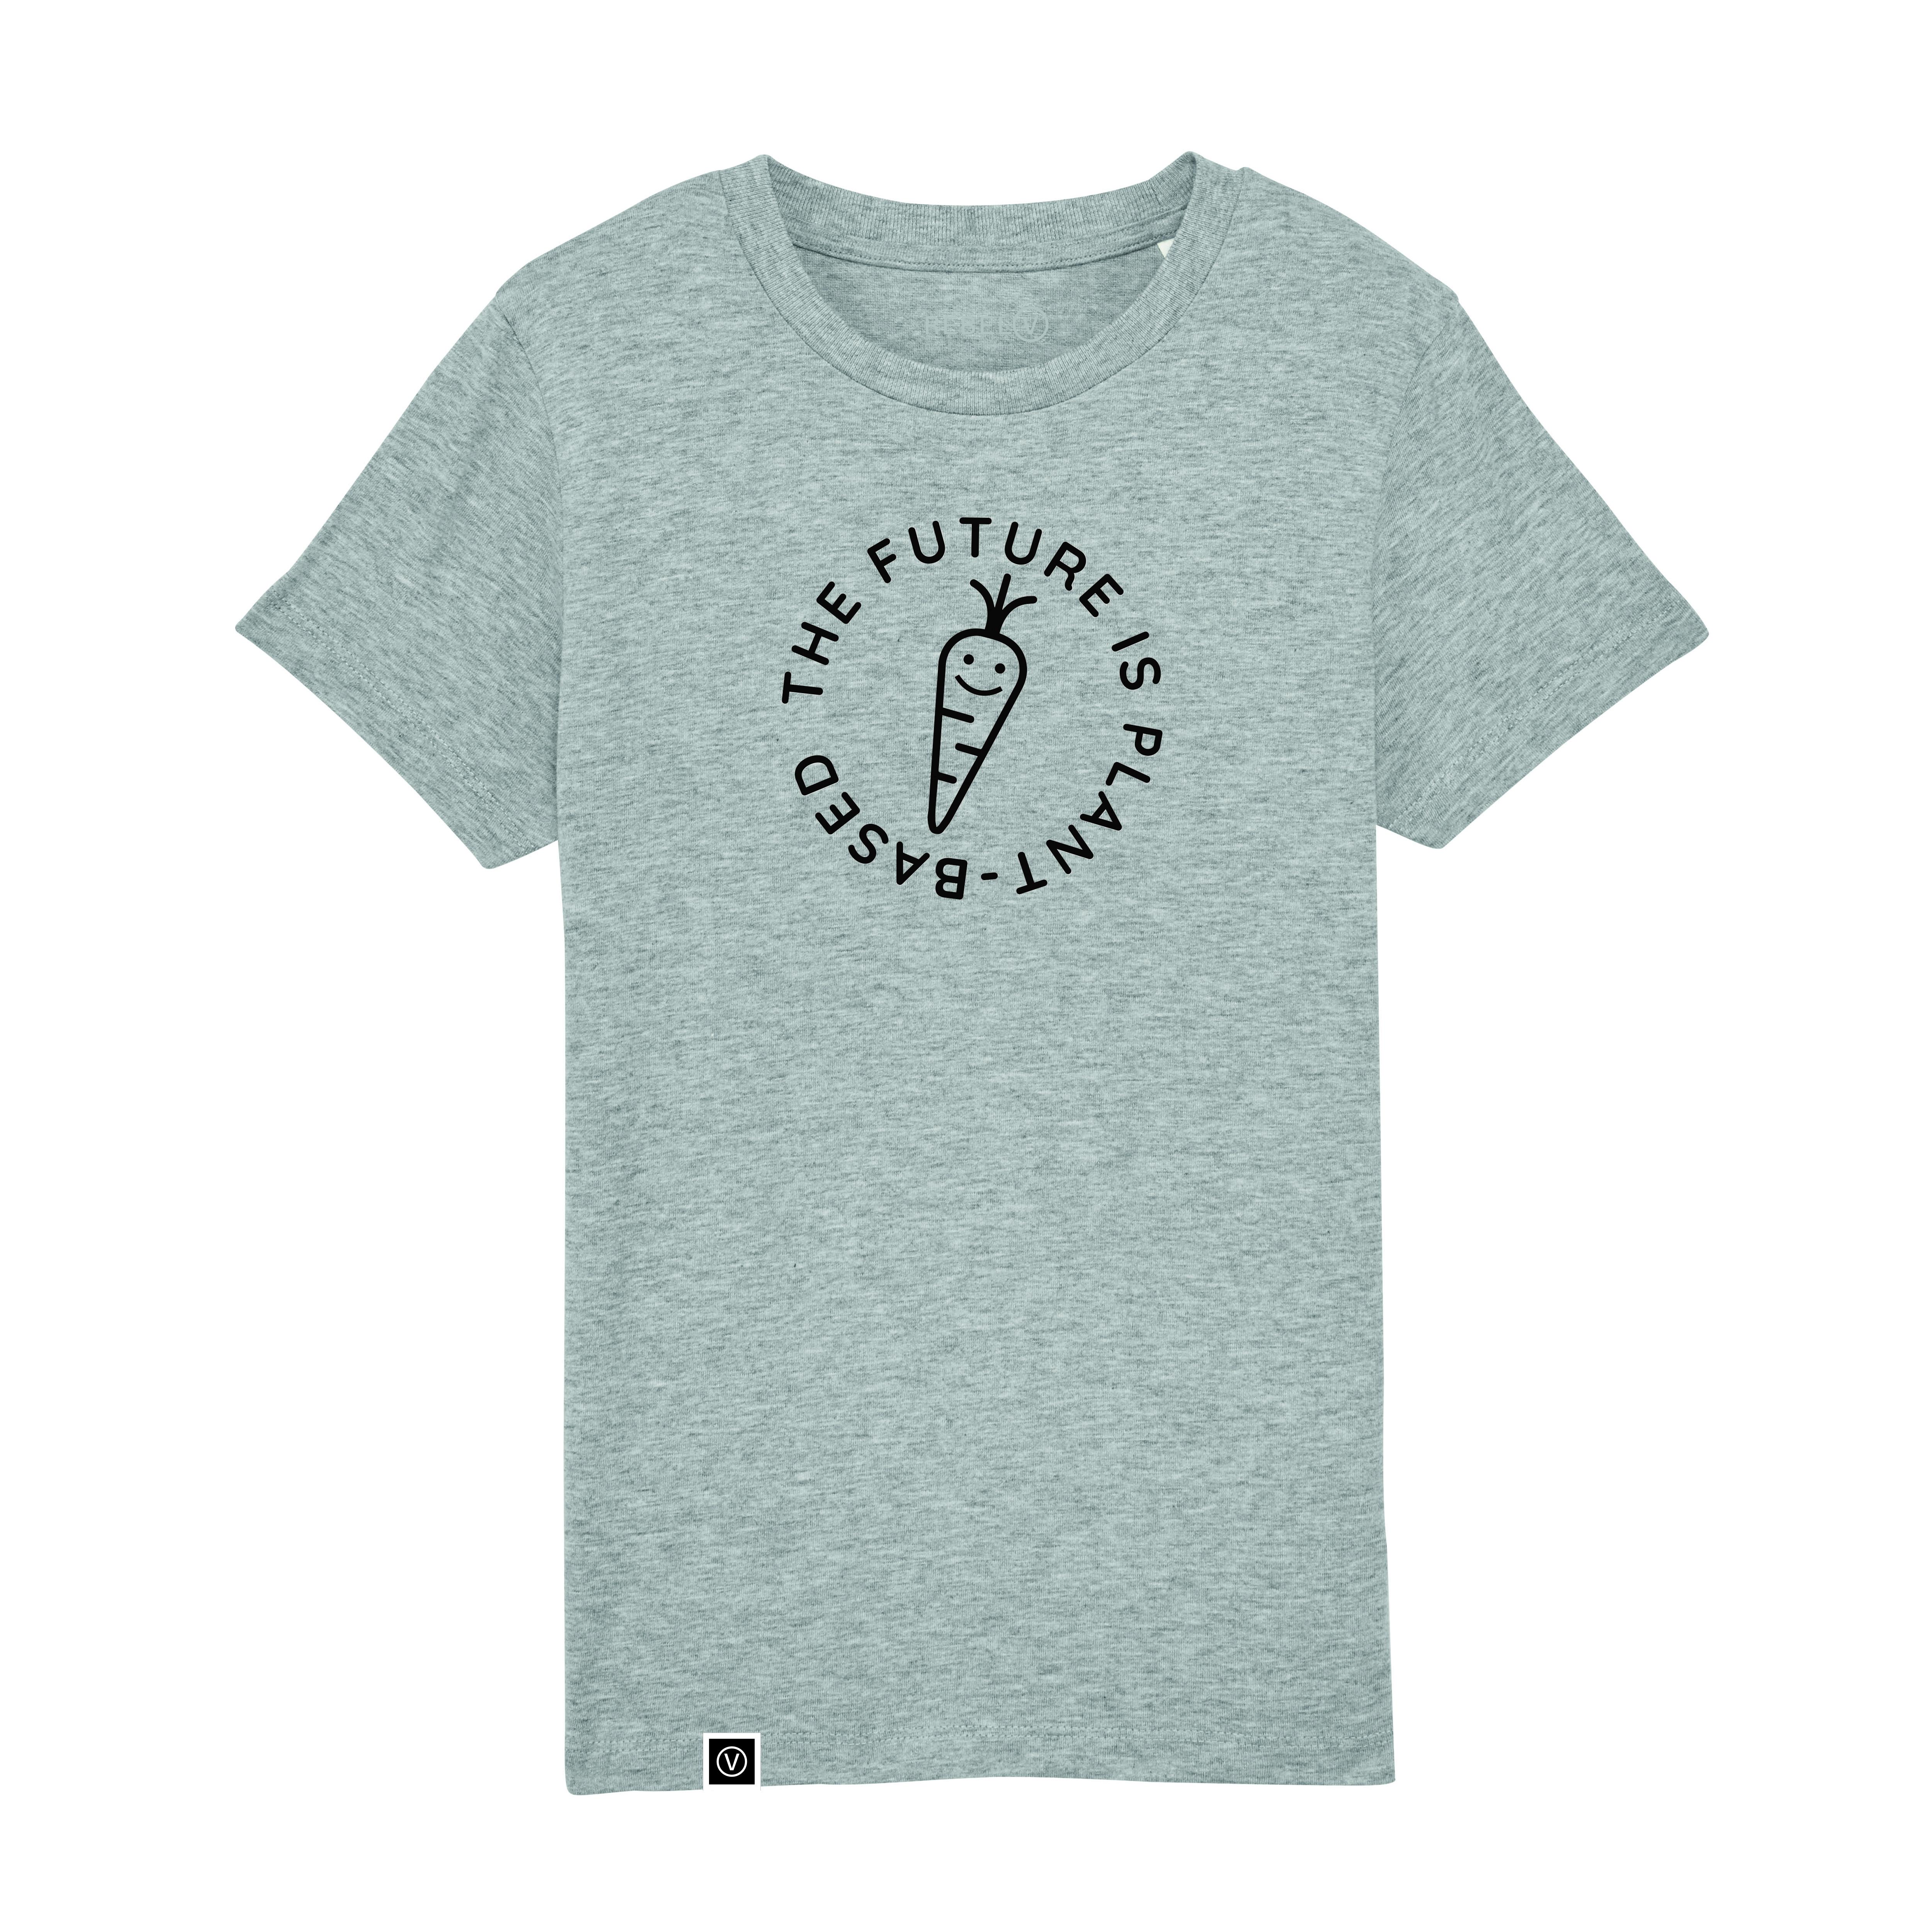 Heather grey t-shirt on a white background. Black outline image of a carrot with a smiley face on centre chest with the words the future is plant based going round the outside. Small white square label on bottom right hem with a white V in a white circle on a black background.